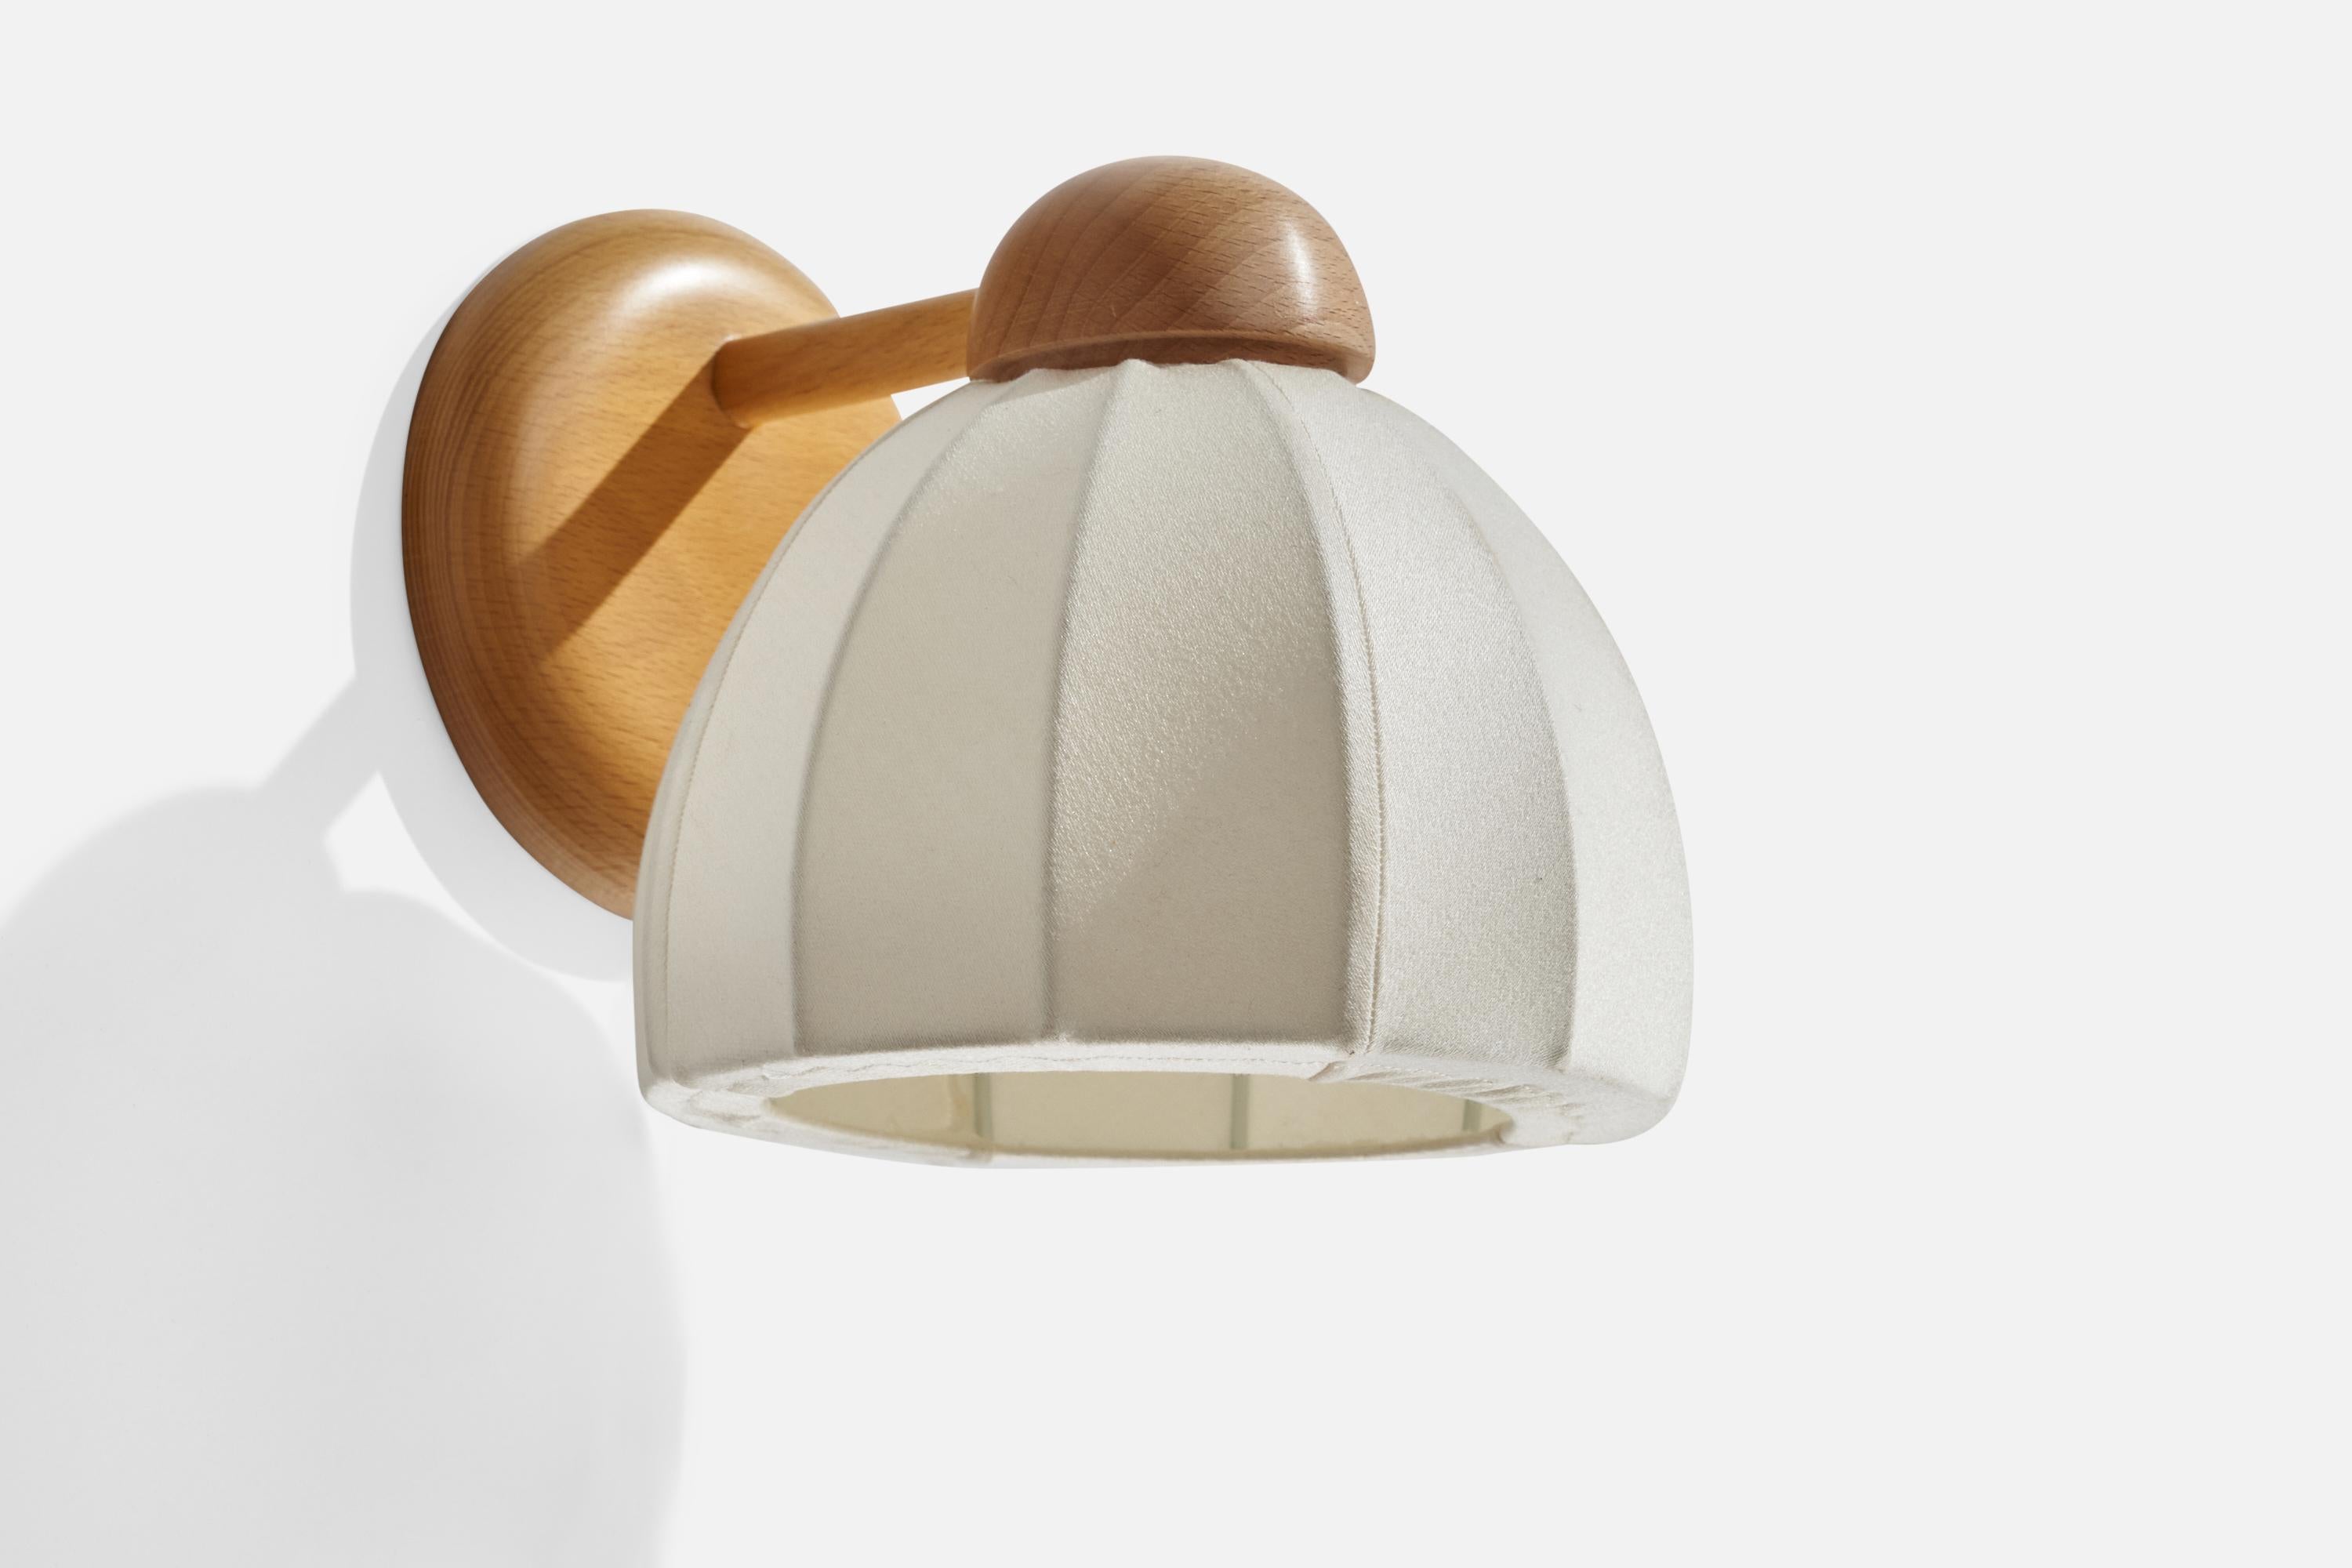 An oak and off-white fabric wall light designed and produced in Sweden, 1970s.

Overall Dimensions (inches): 8” H x 6.75” W x 6.875” D
Back Plate Dimensions (inches): 4.97” H x 0.90” D
Bulb Specifications: E-14 Bulb
Number of Sockets: 1
All lighting